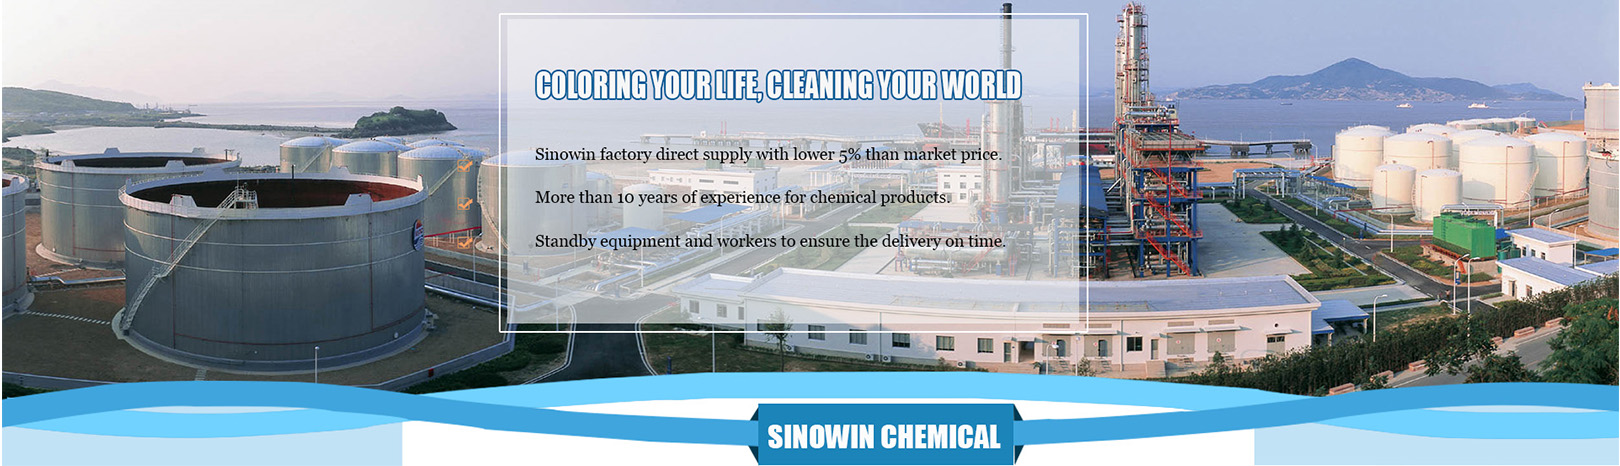 China Solvent Factory